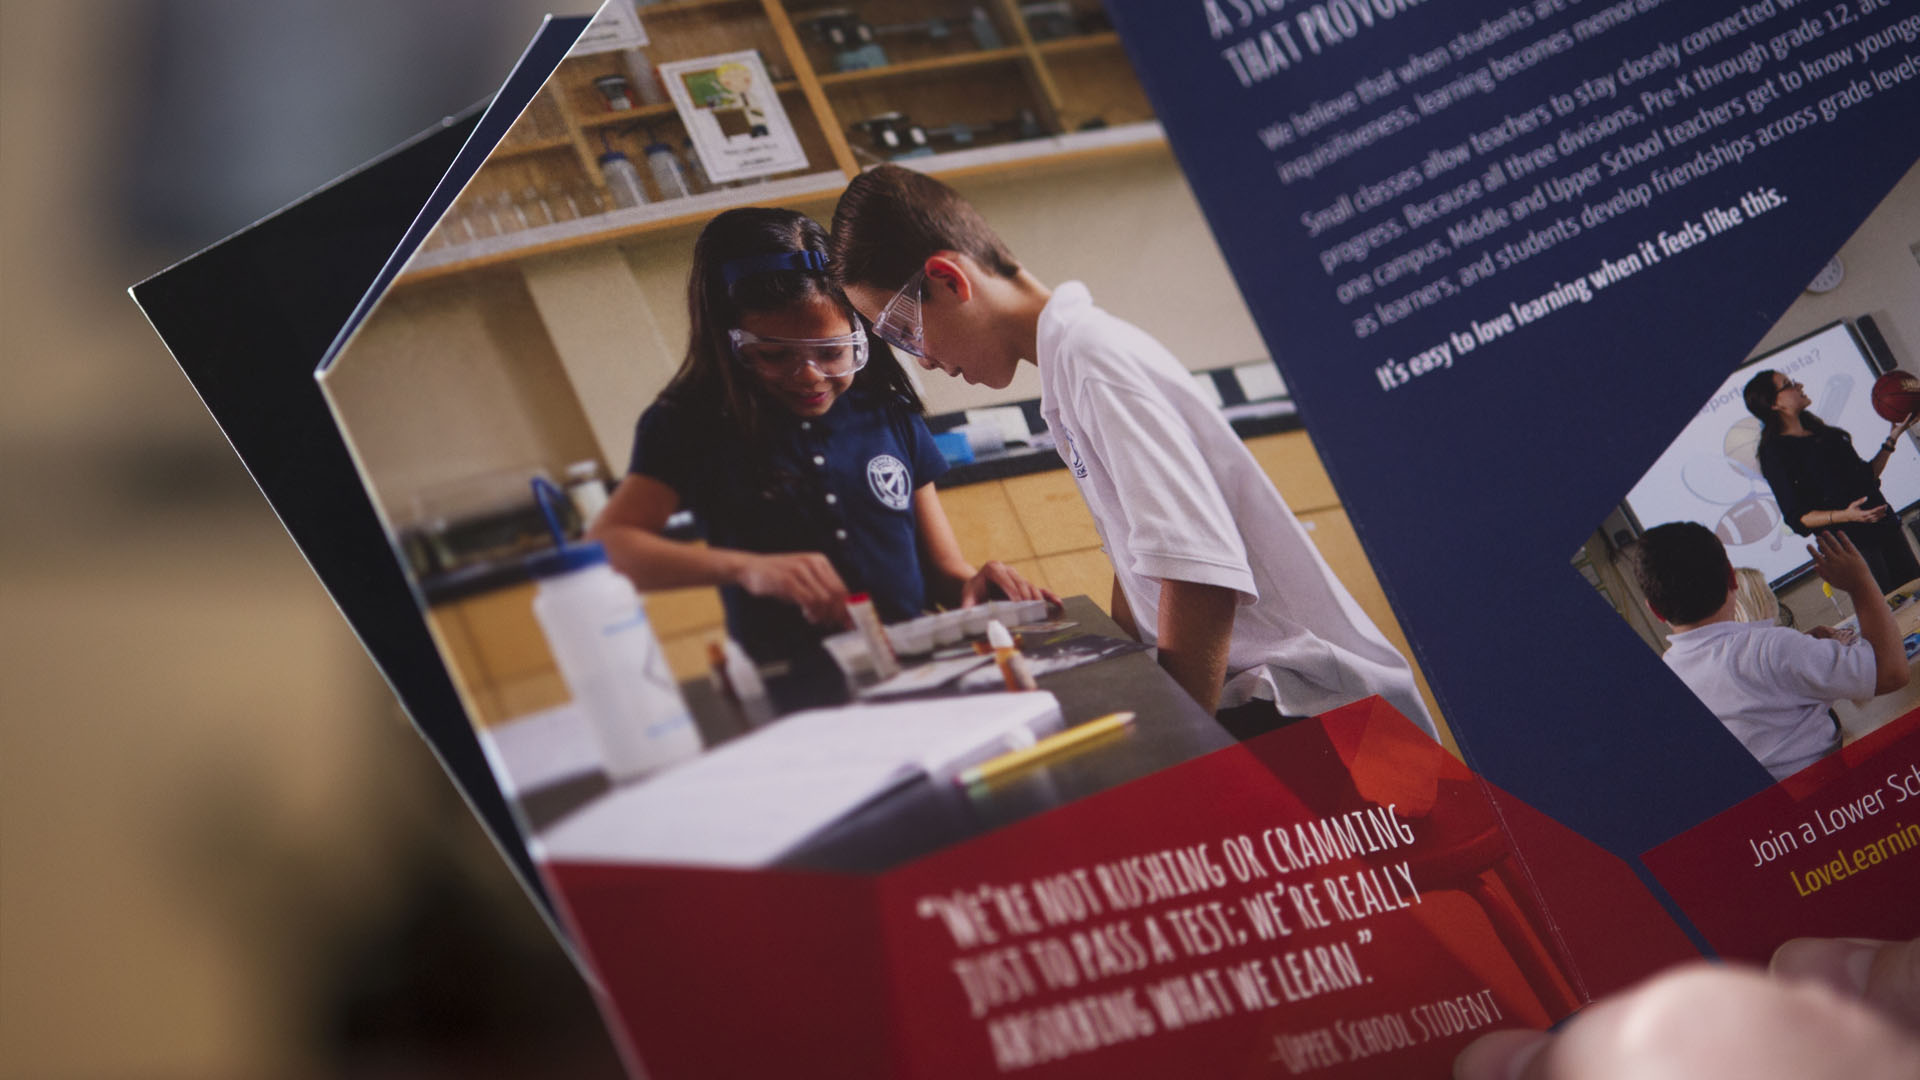 Saddle-River-Day-School-Branding-Marketing-Admissions-Campaign-Direct-Mail_05.jpg